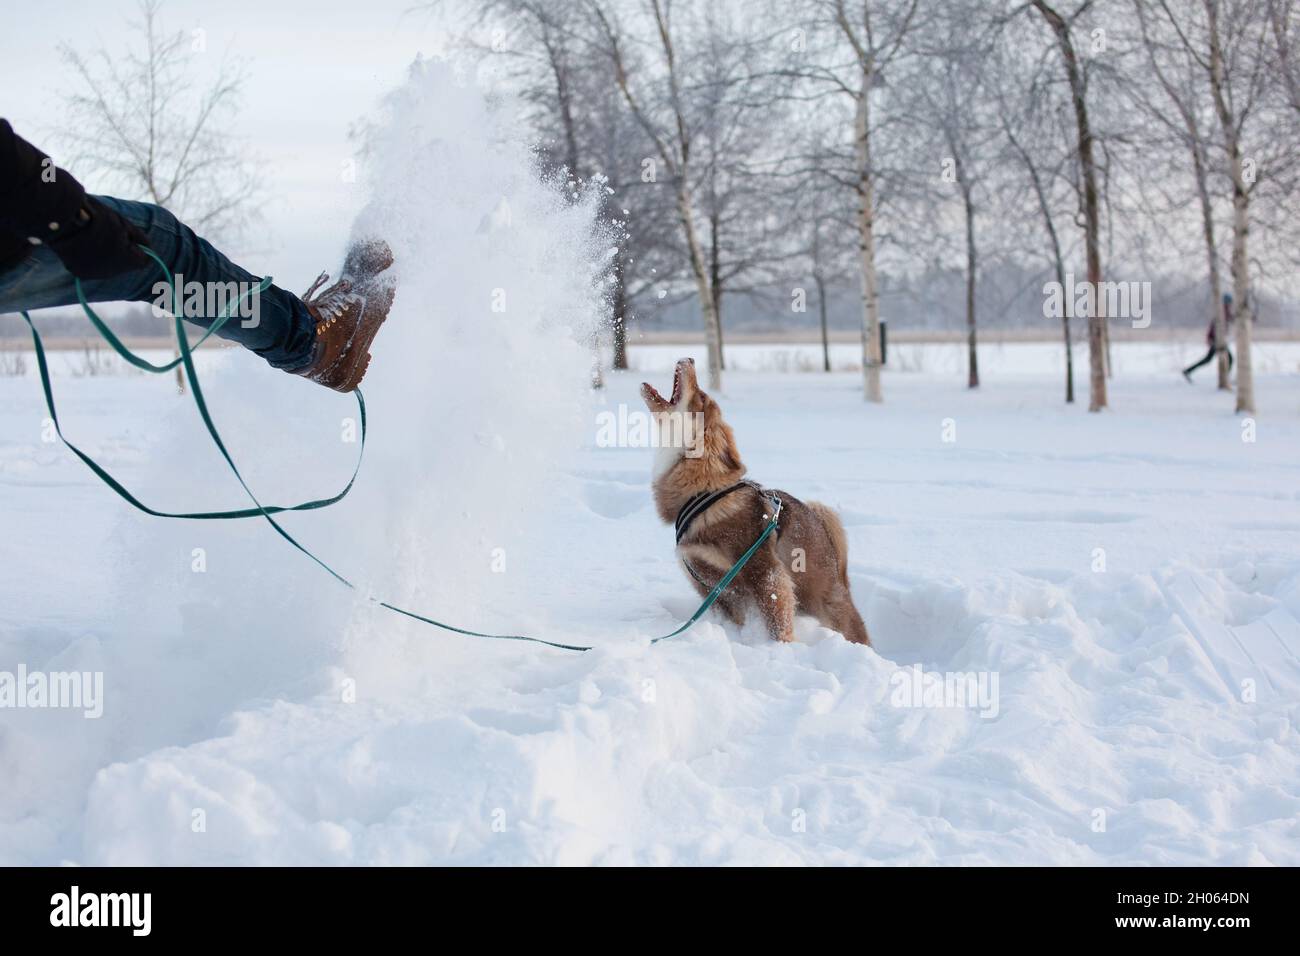 Dog playing with snow, having fun. Man kicking snow in the air. Stock Photo